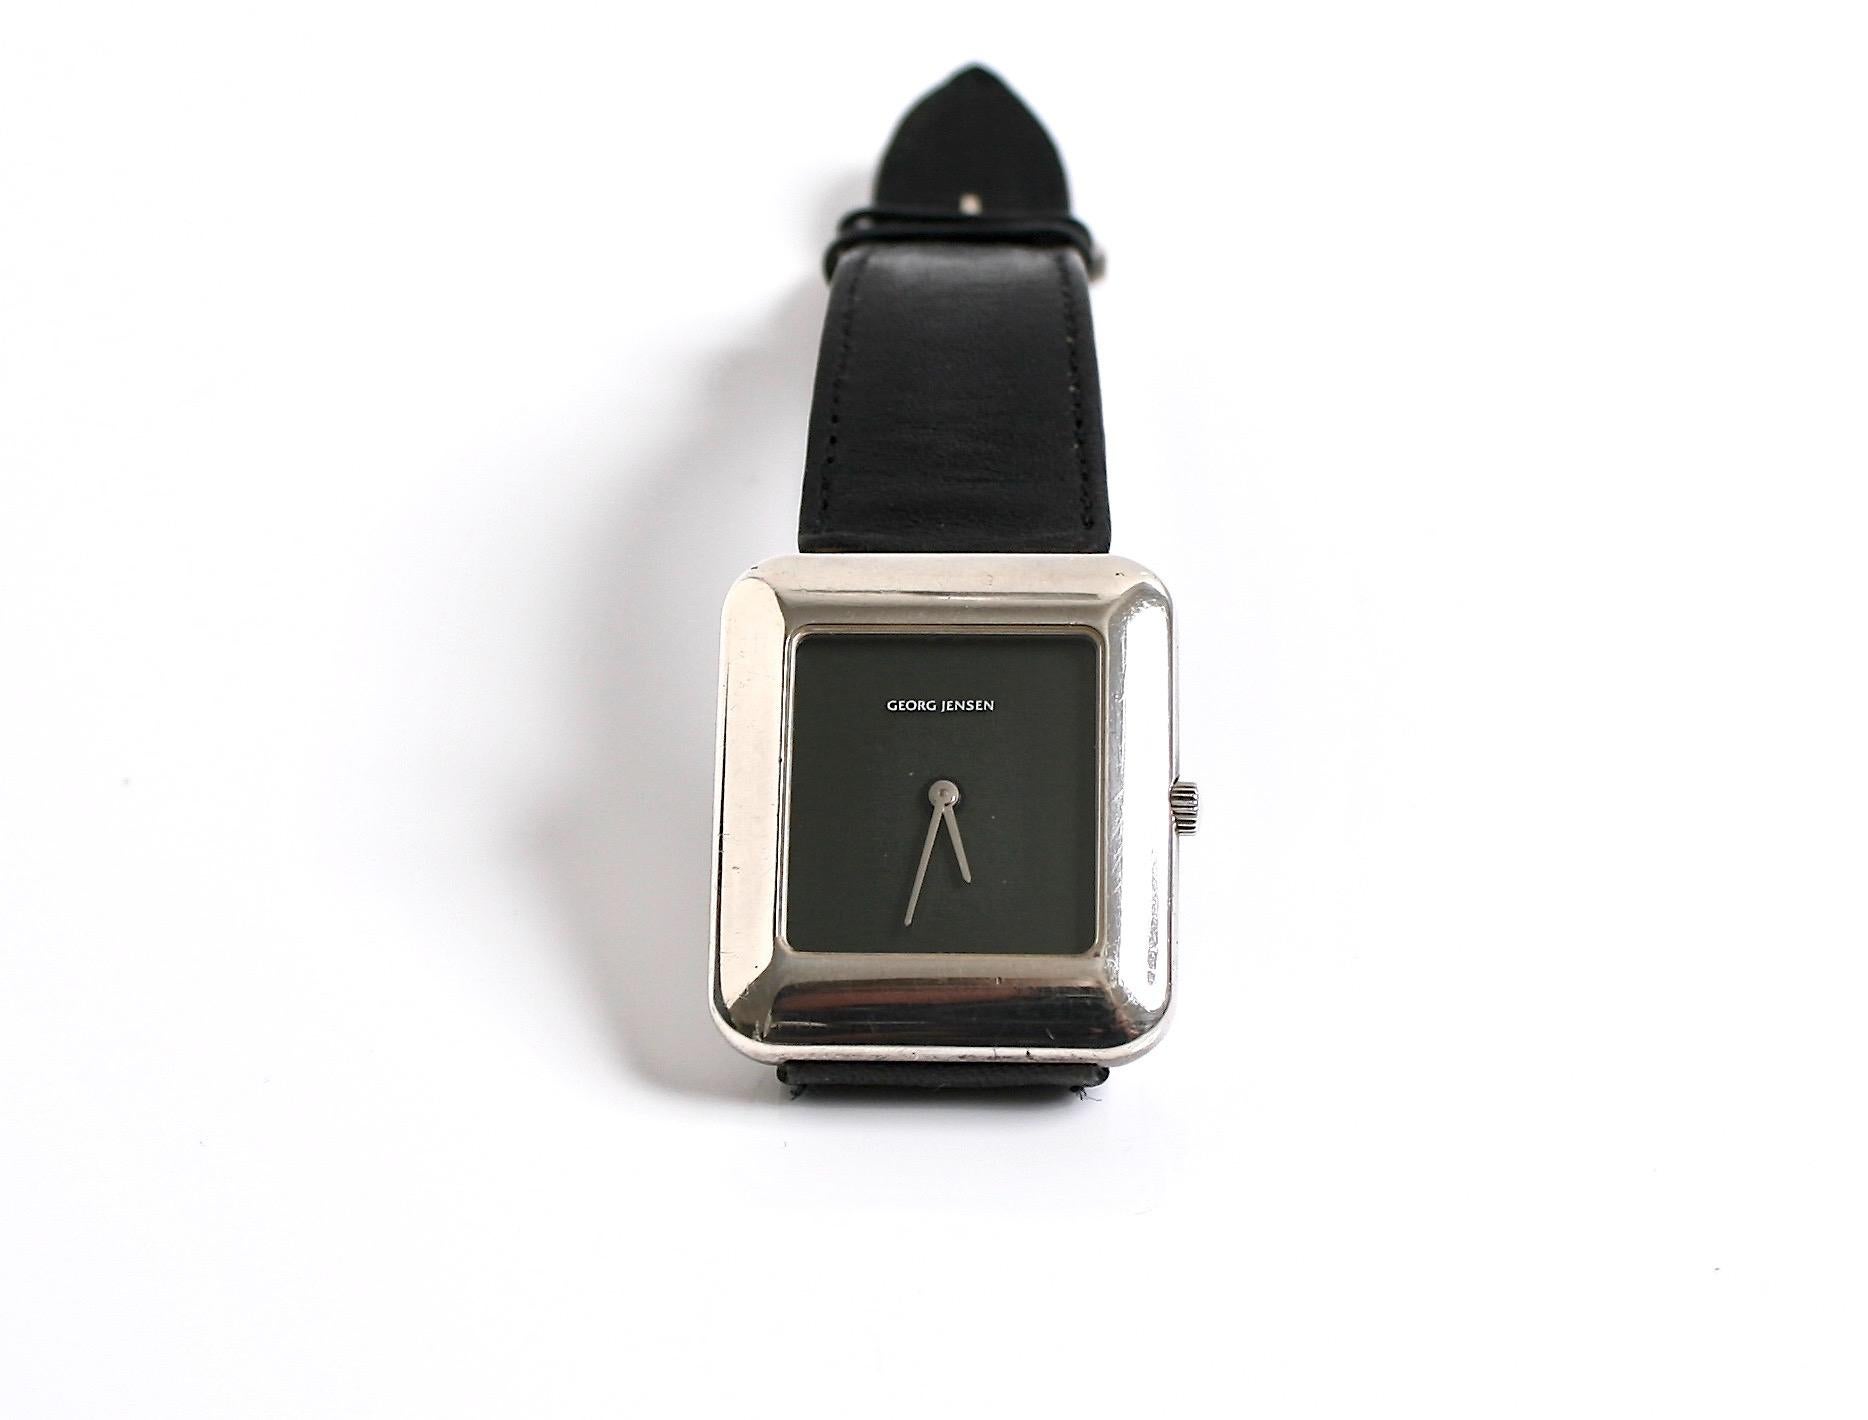 Rare Georg Jensen Sterling silver quartz Watch Designed by Line Munth Denmark c1980
Crisp black face with with silver hands
Has a digital display with date & time
Original black calf strap with sterling silver buckle with Georg Jensen logo

Design